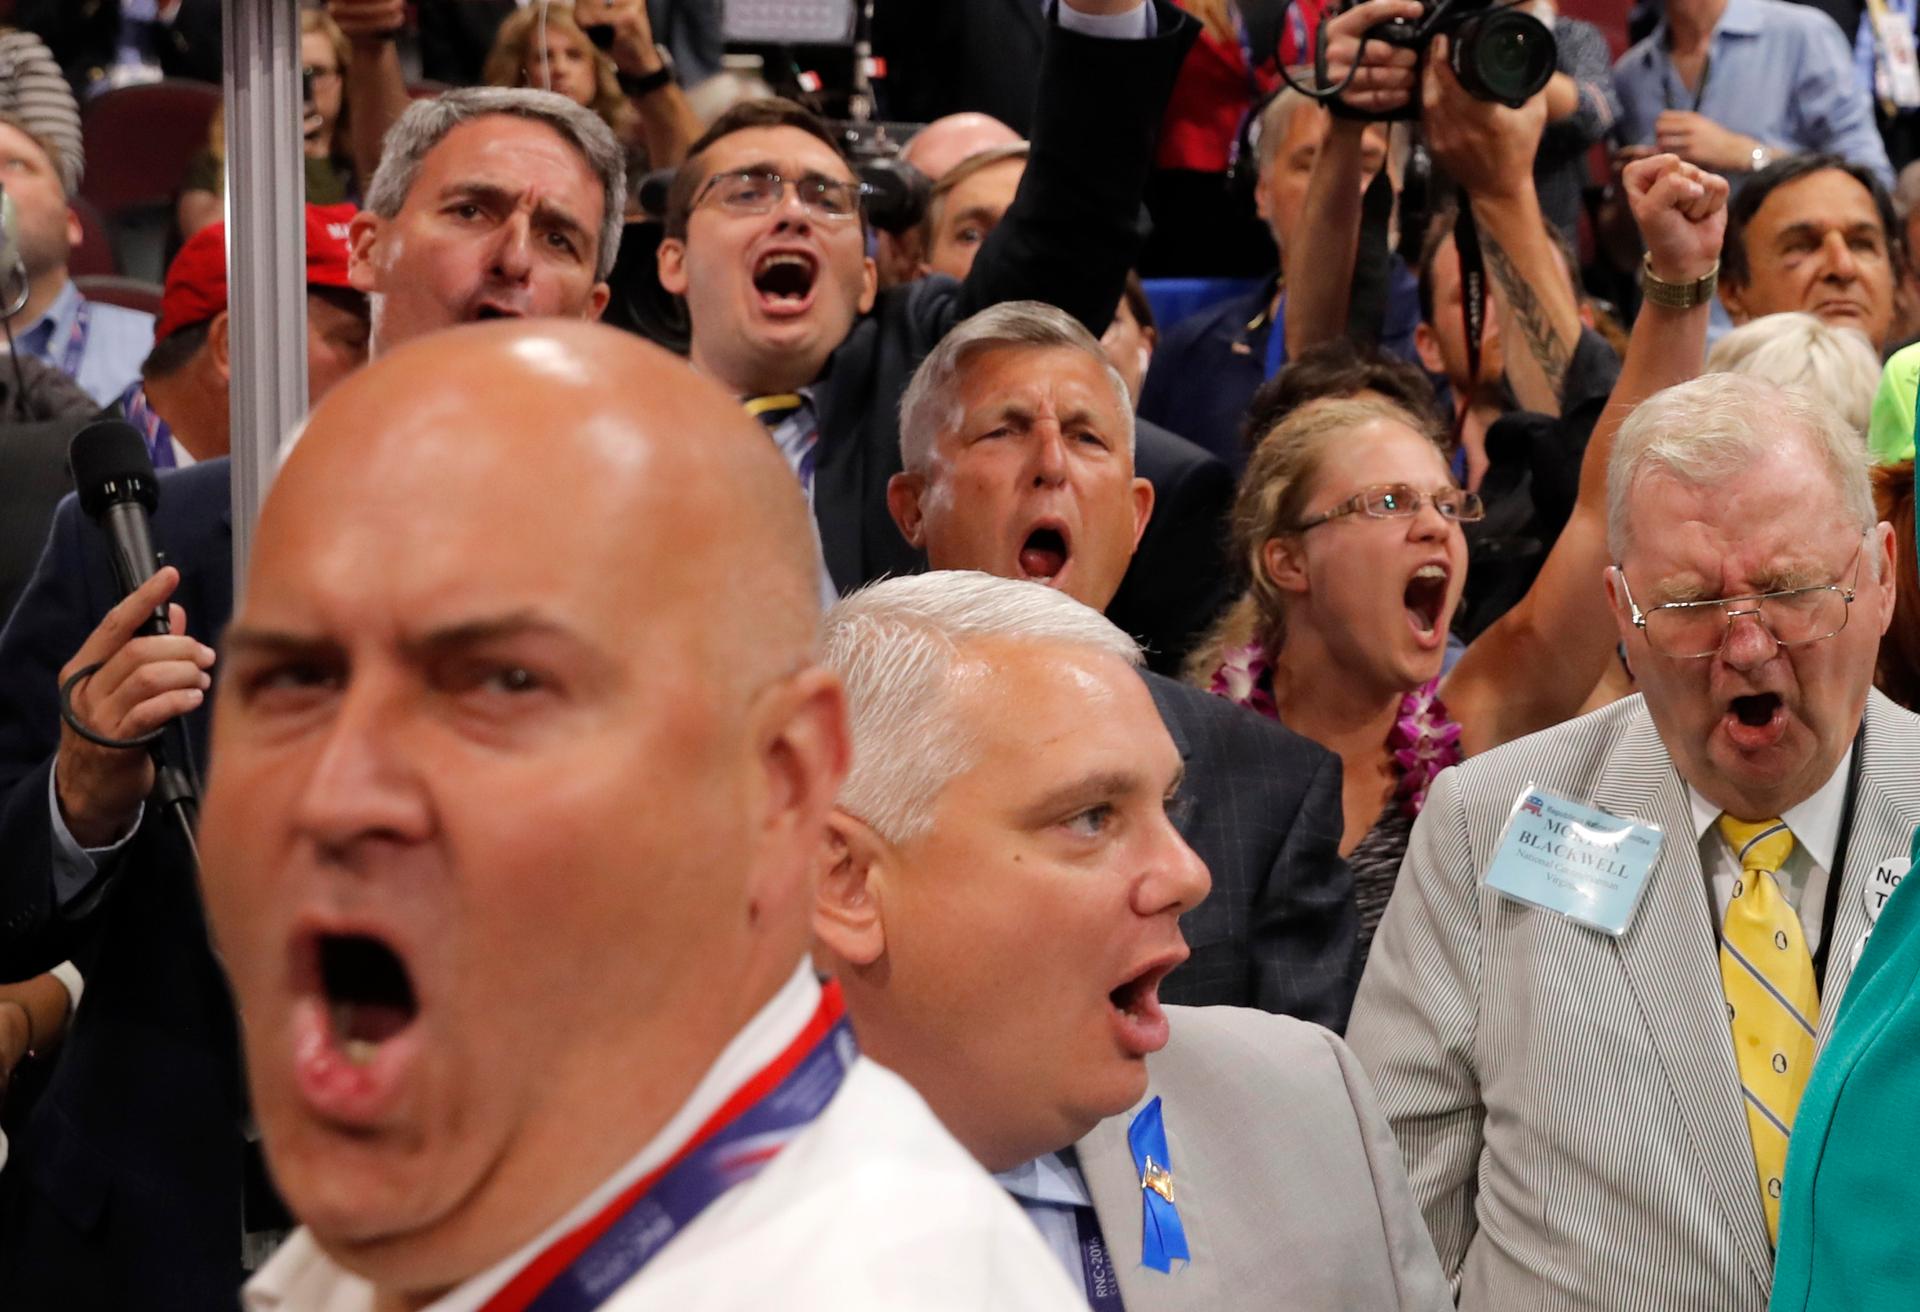 faces in crowd yelling, close up image